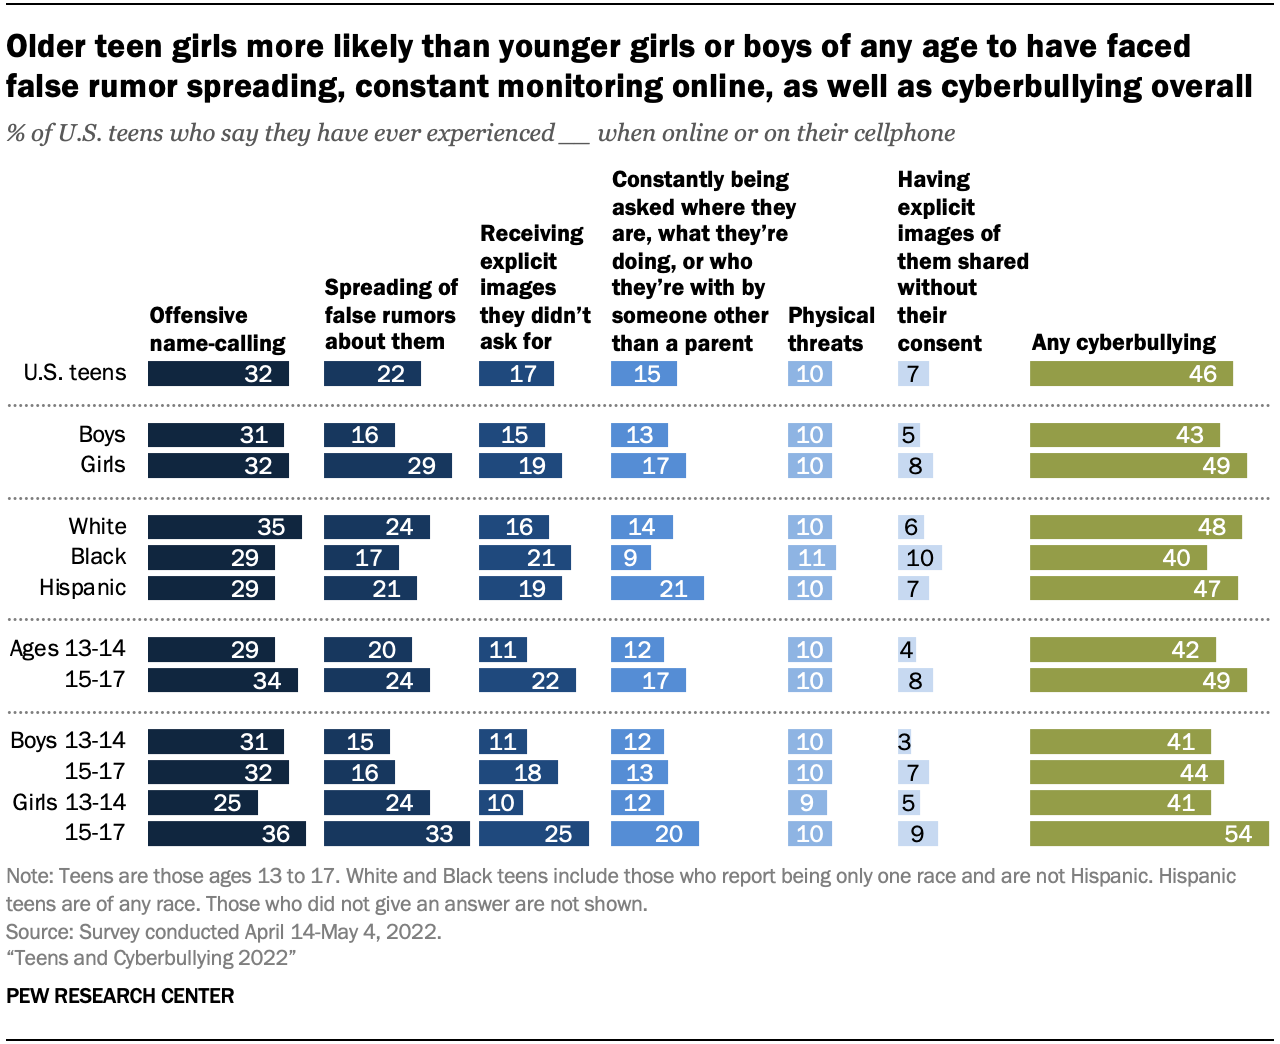 A bar chart showing that older teen girls more likely than younger girls or boys of any age to have faced false rumor spreading, constant monitoring online, as well as cyberbullying overall